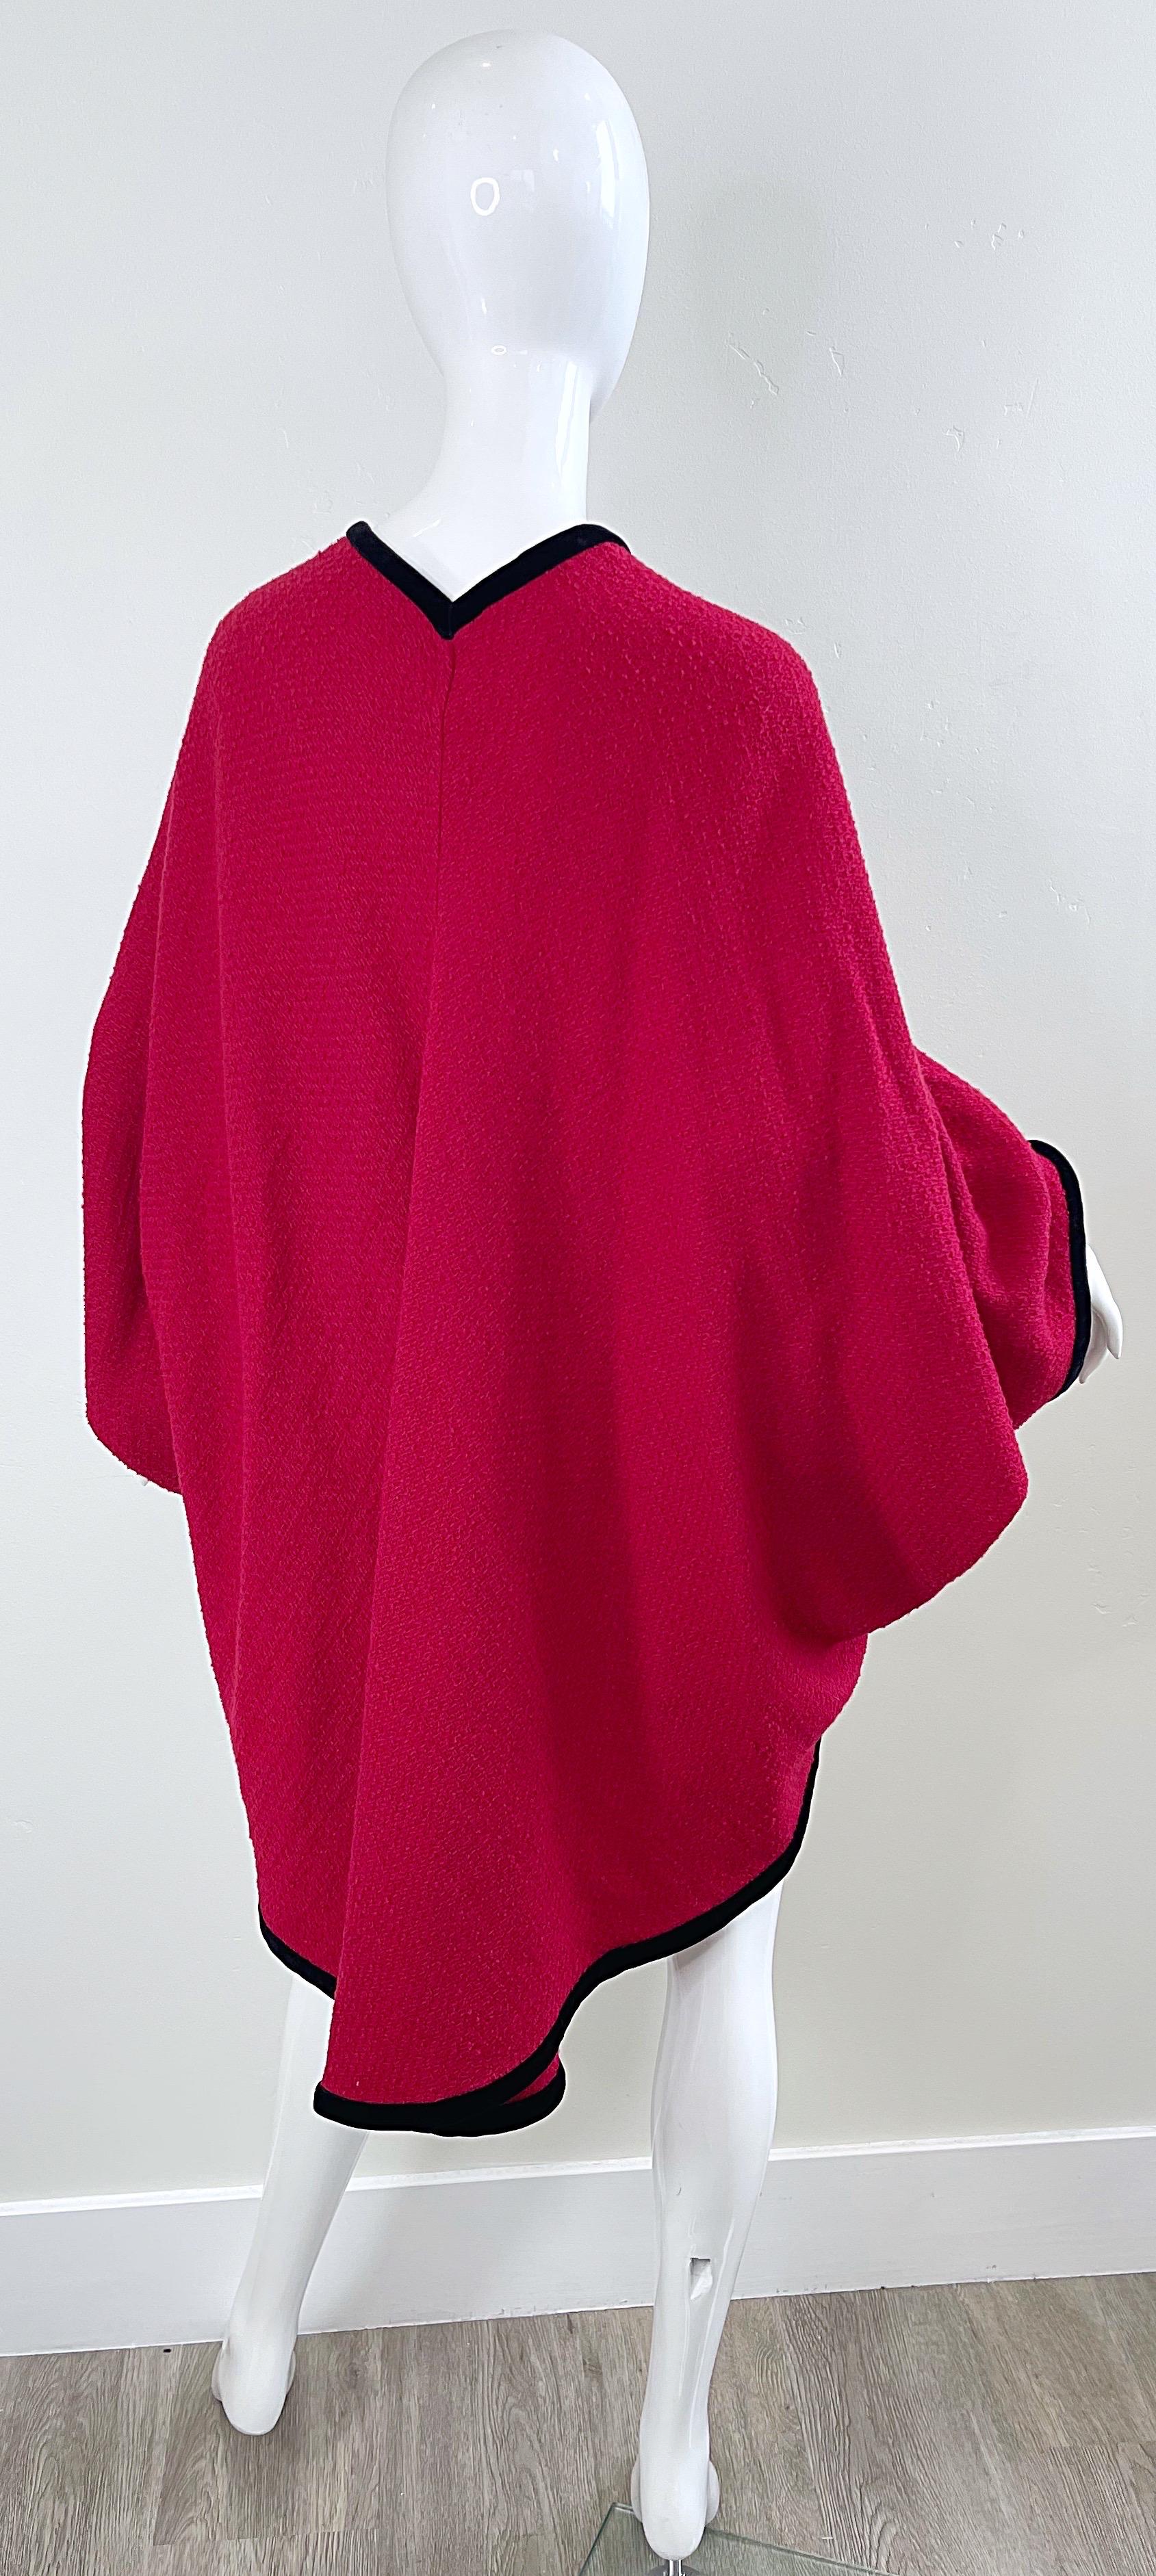 Karl Lagerfeld 1980s Lipstick Red Boiled Wool Cocoon Vintage Cape Kimono Jacket For Sale 7